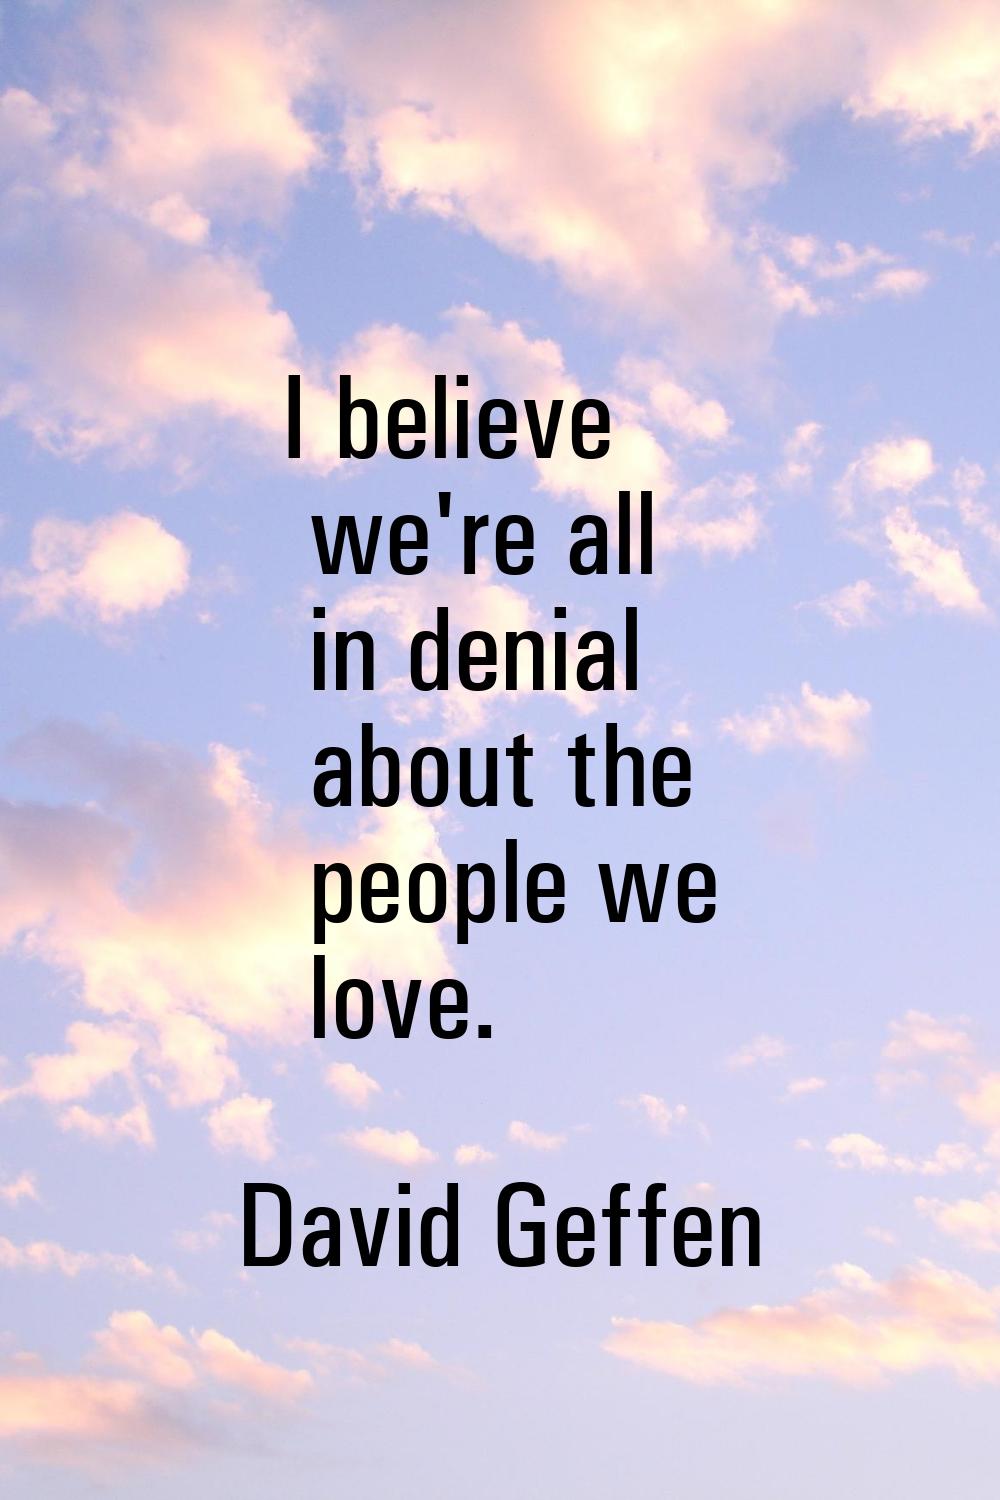 I believe we're all in denial about the people we love.